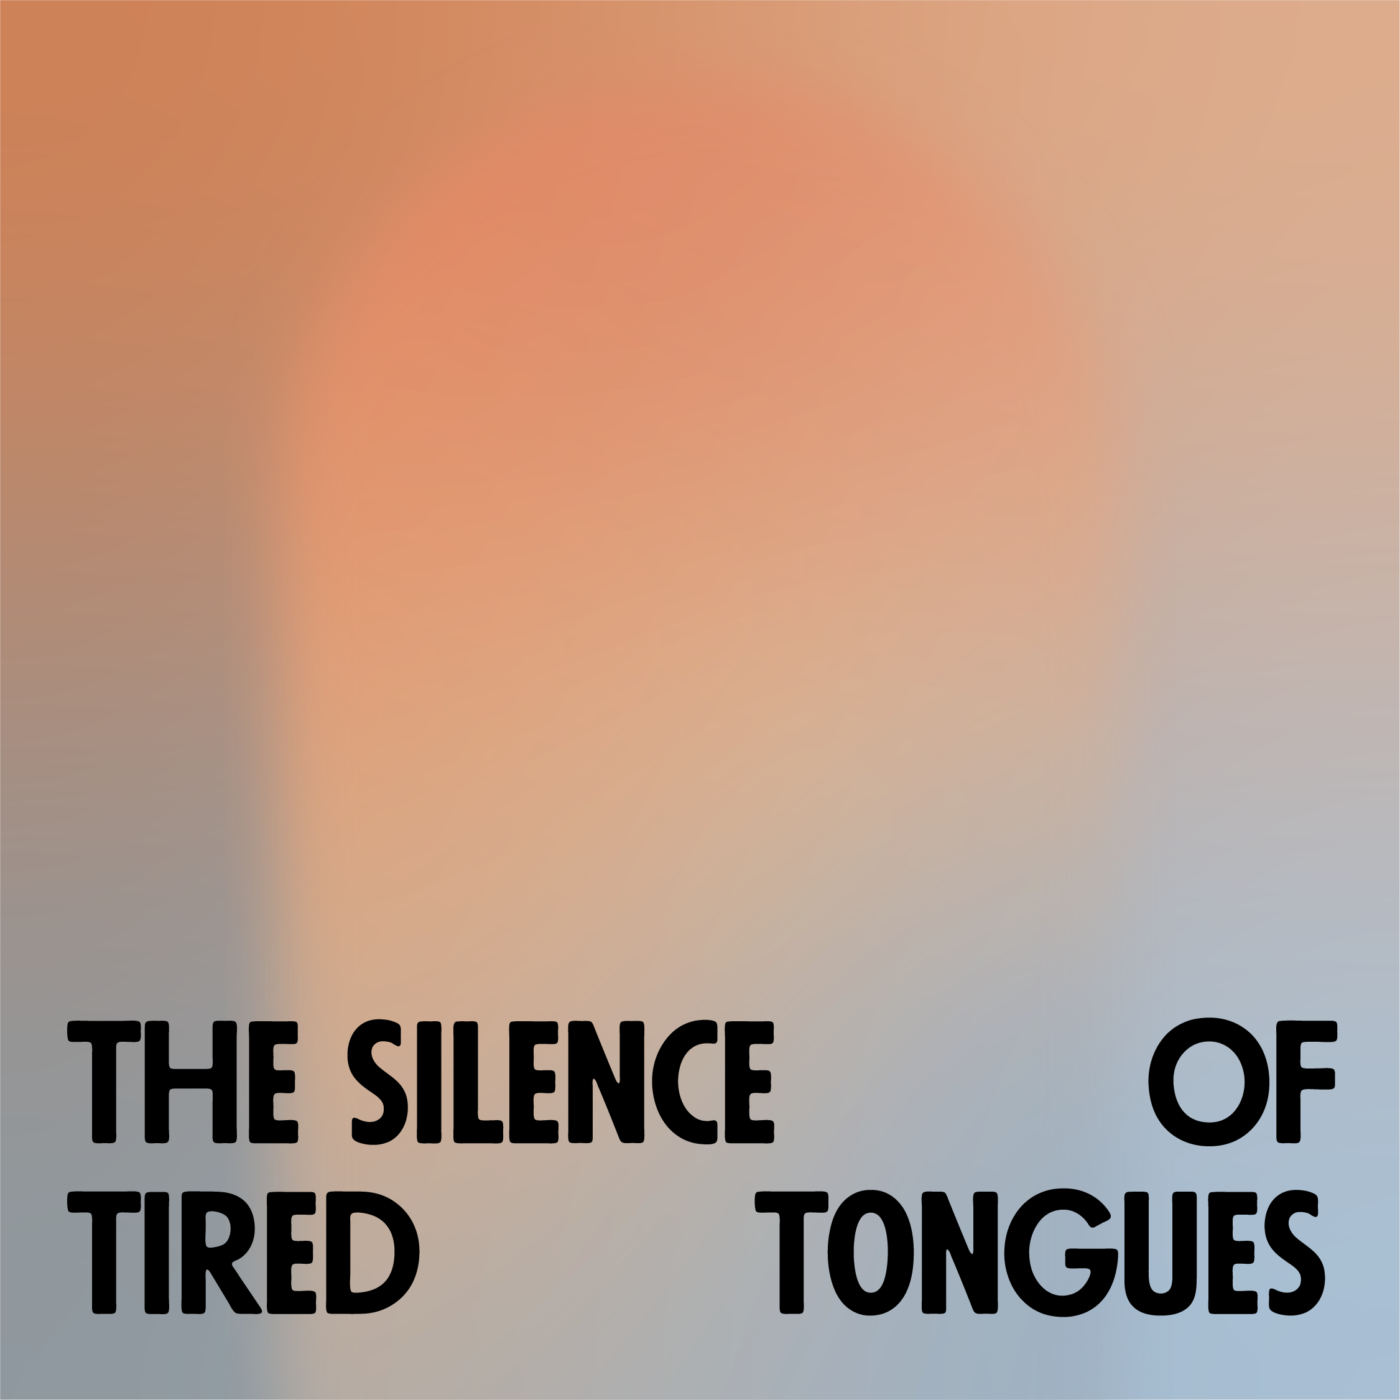 Image for the exhibition The silence of tired tongues at Framer Framed